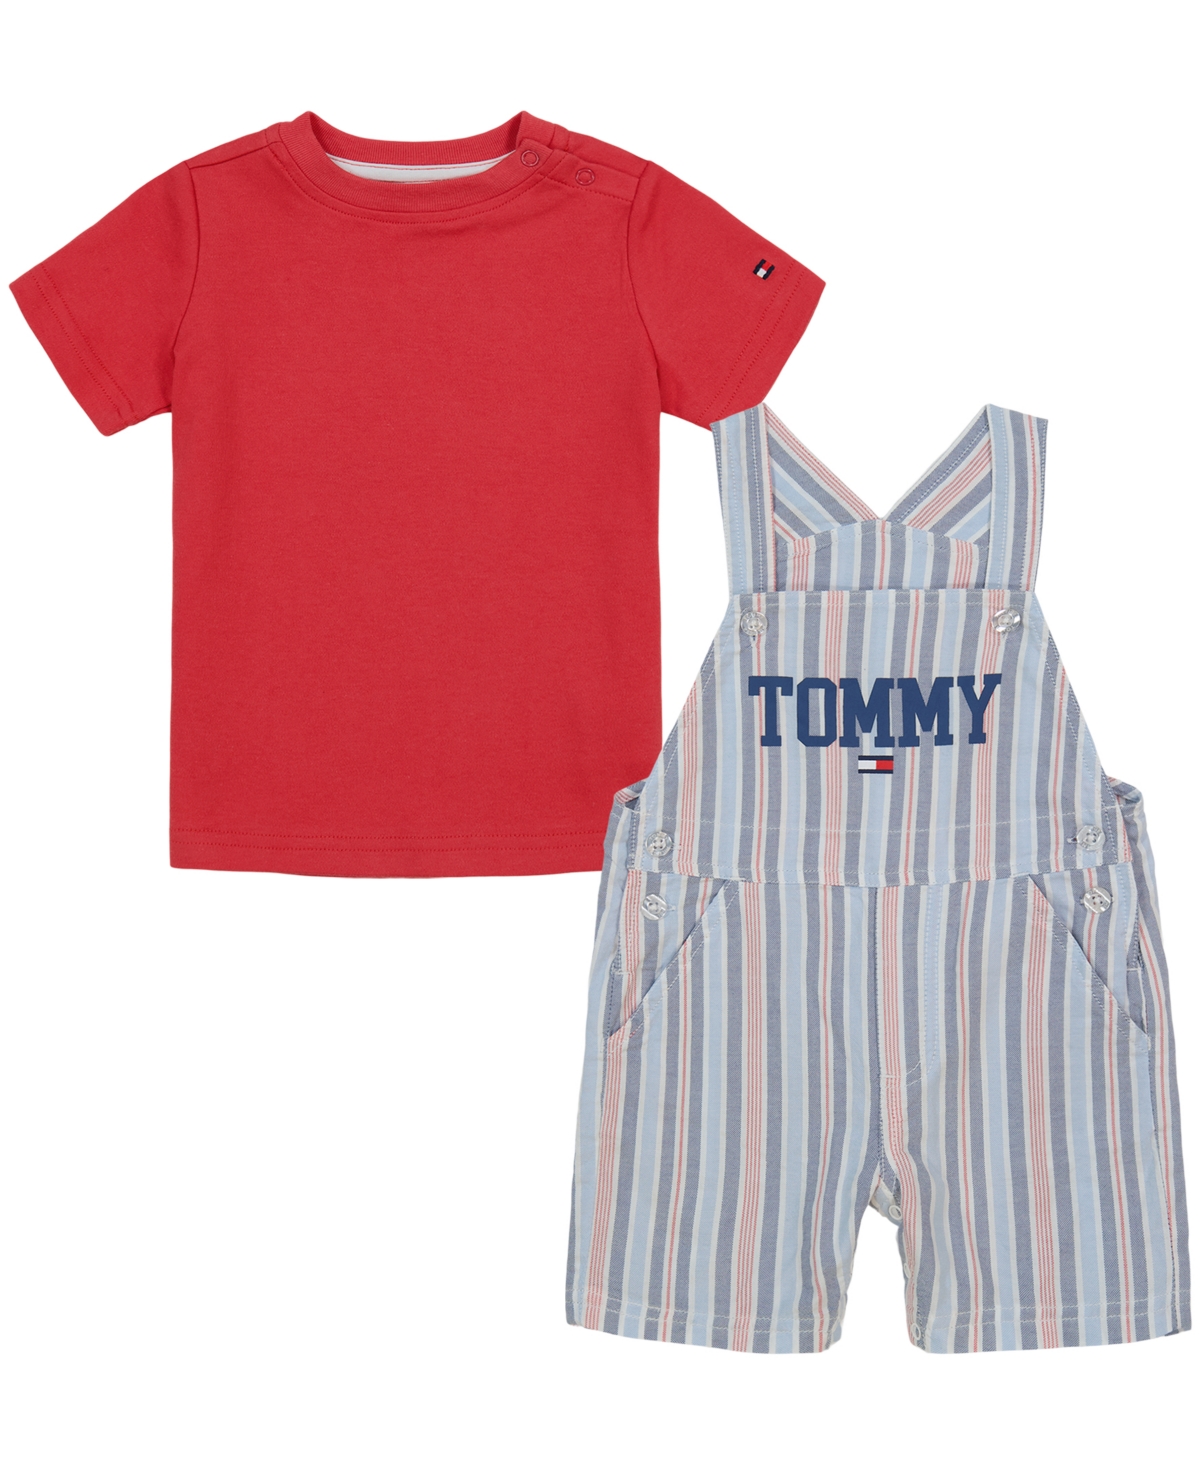 Tommy Hilfiger Baby Boys Short Sleeve Solid T-shirt And Oxford Stripe Shortalls Set In Stripes,red